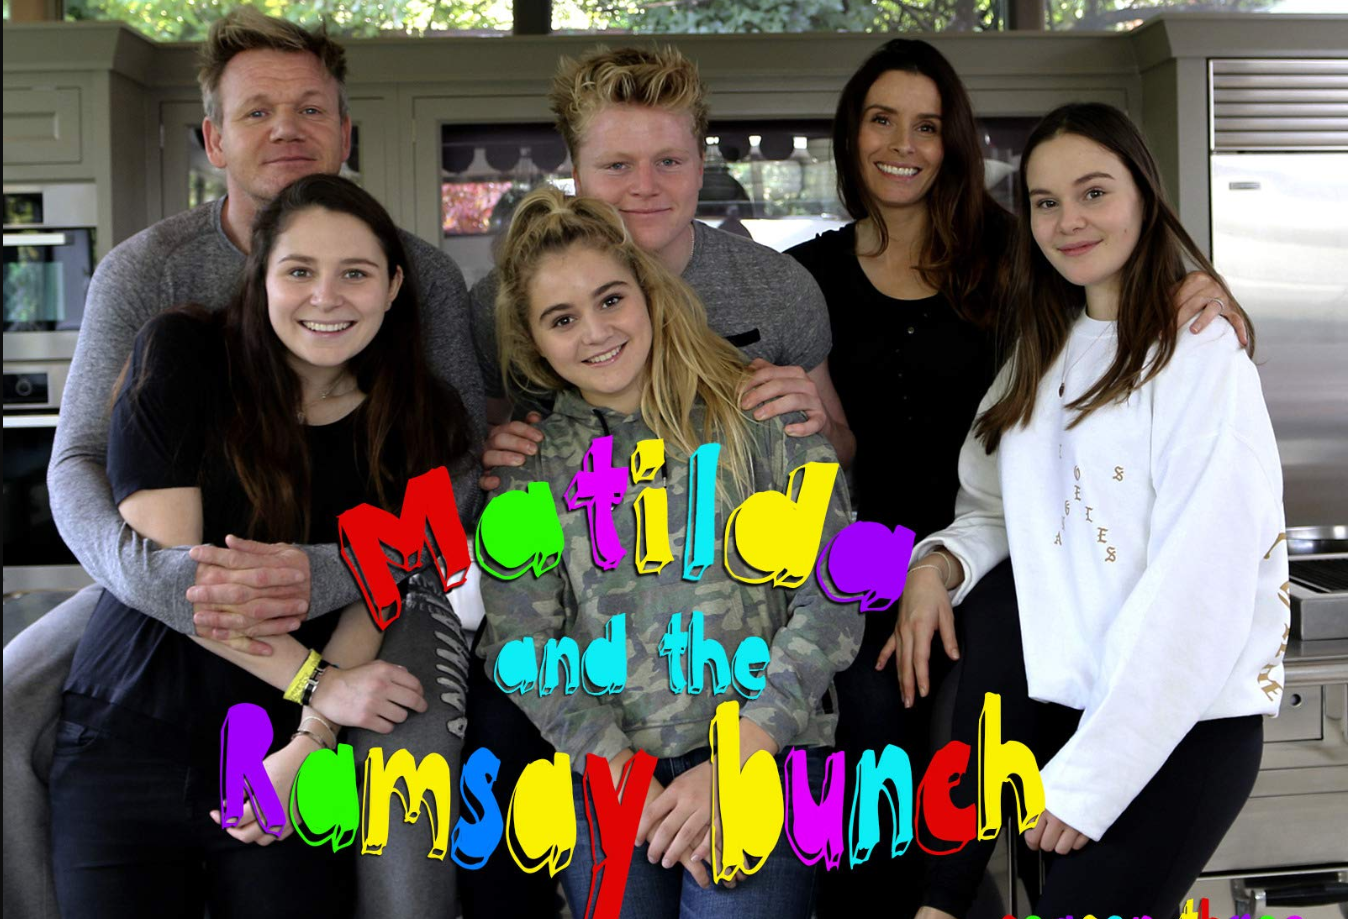 Matilda, and The Ramsay Bunch